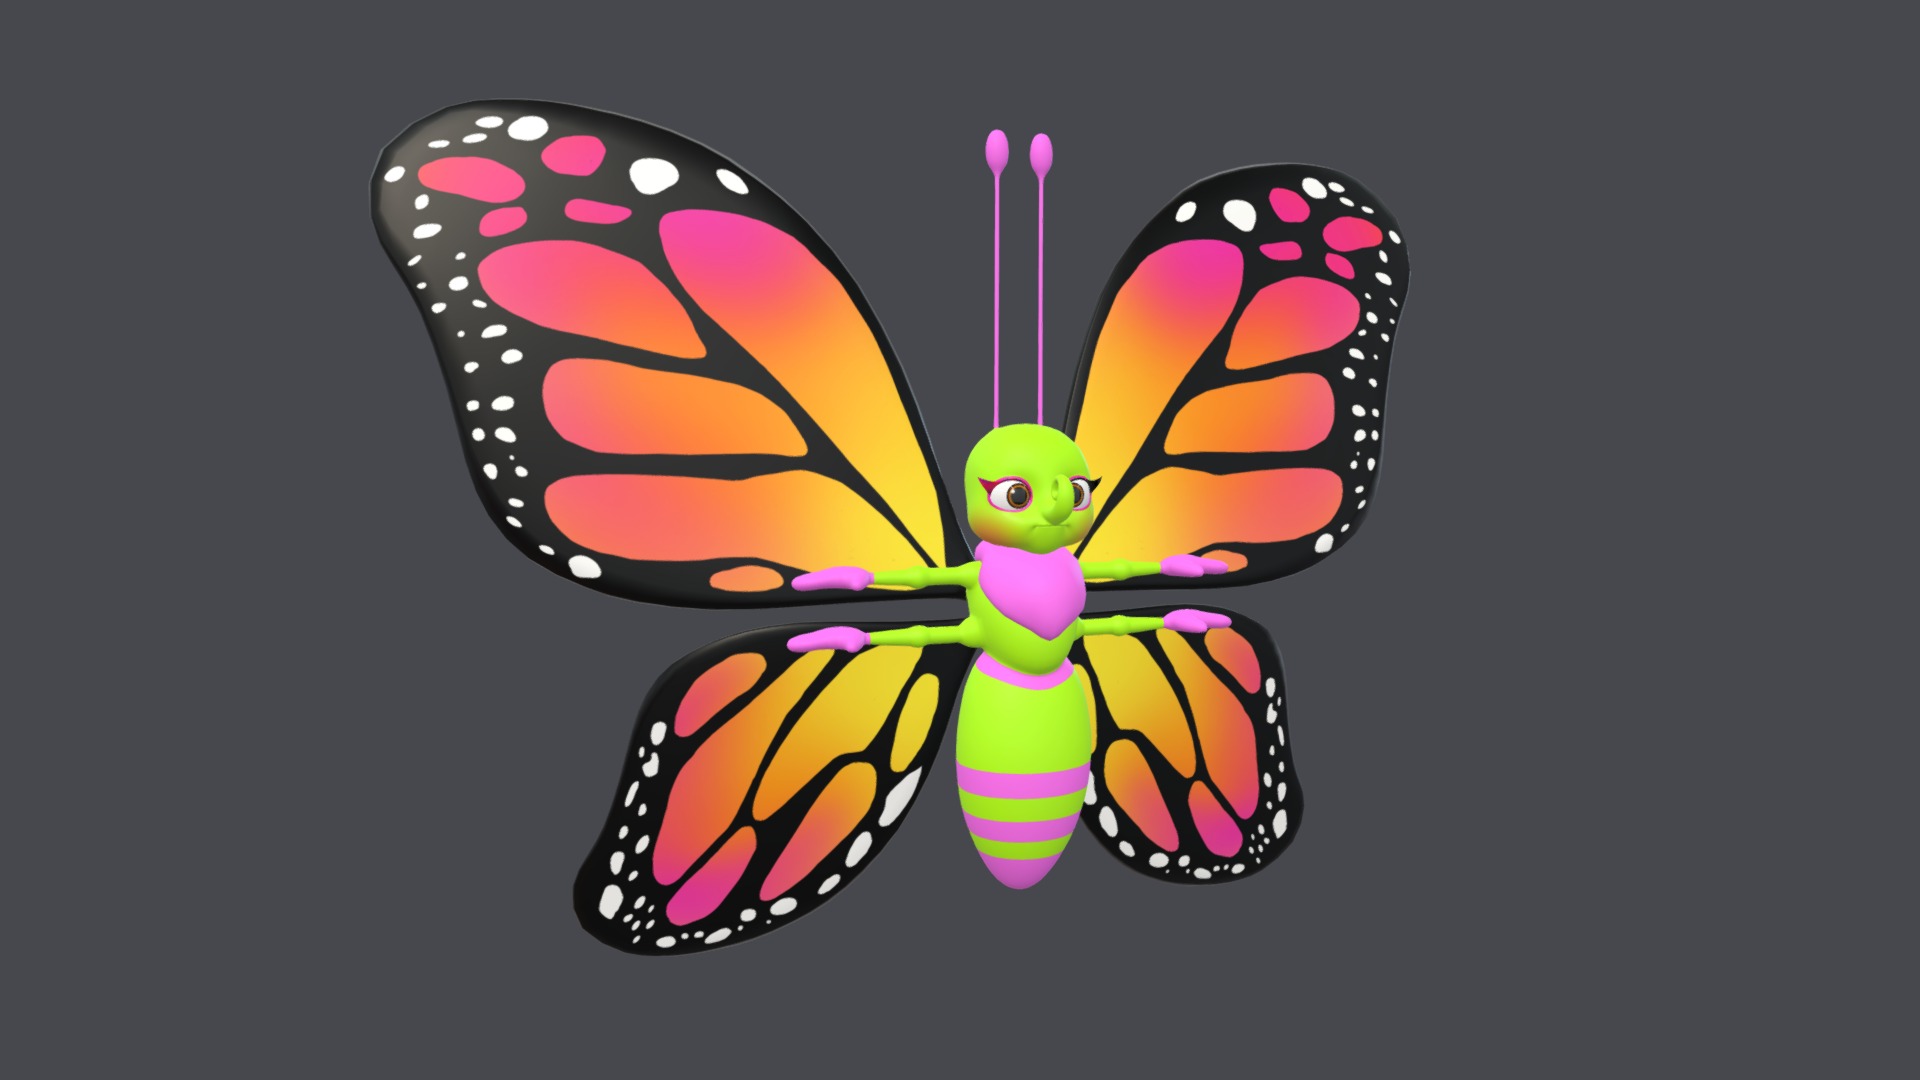 3D model Asset – Cartoons – Character – Butterfly – Rig - This is a 3D model of the Asset - Cartoons - Character - Butterfly - Rig. The 3D model is about a colorful butterfly with wings.